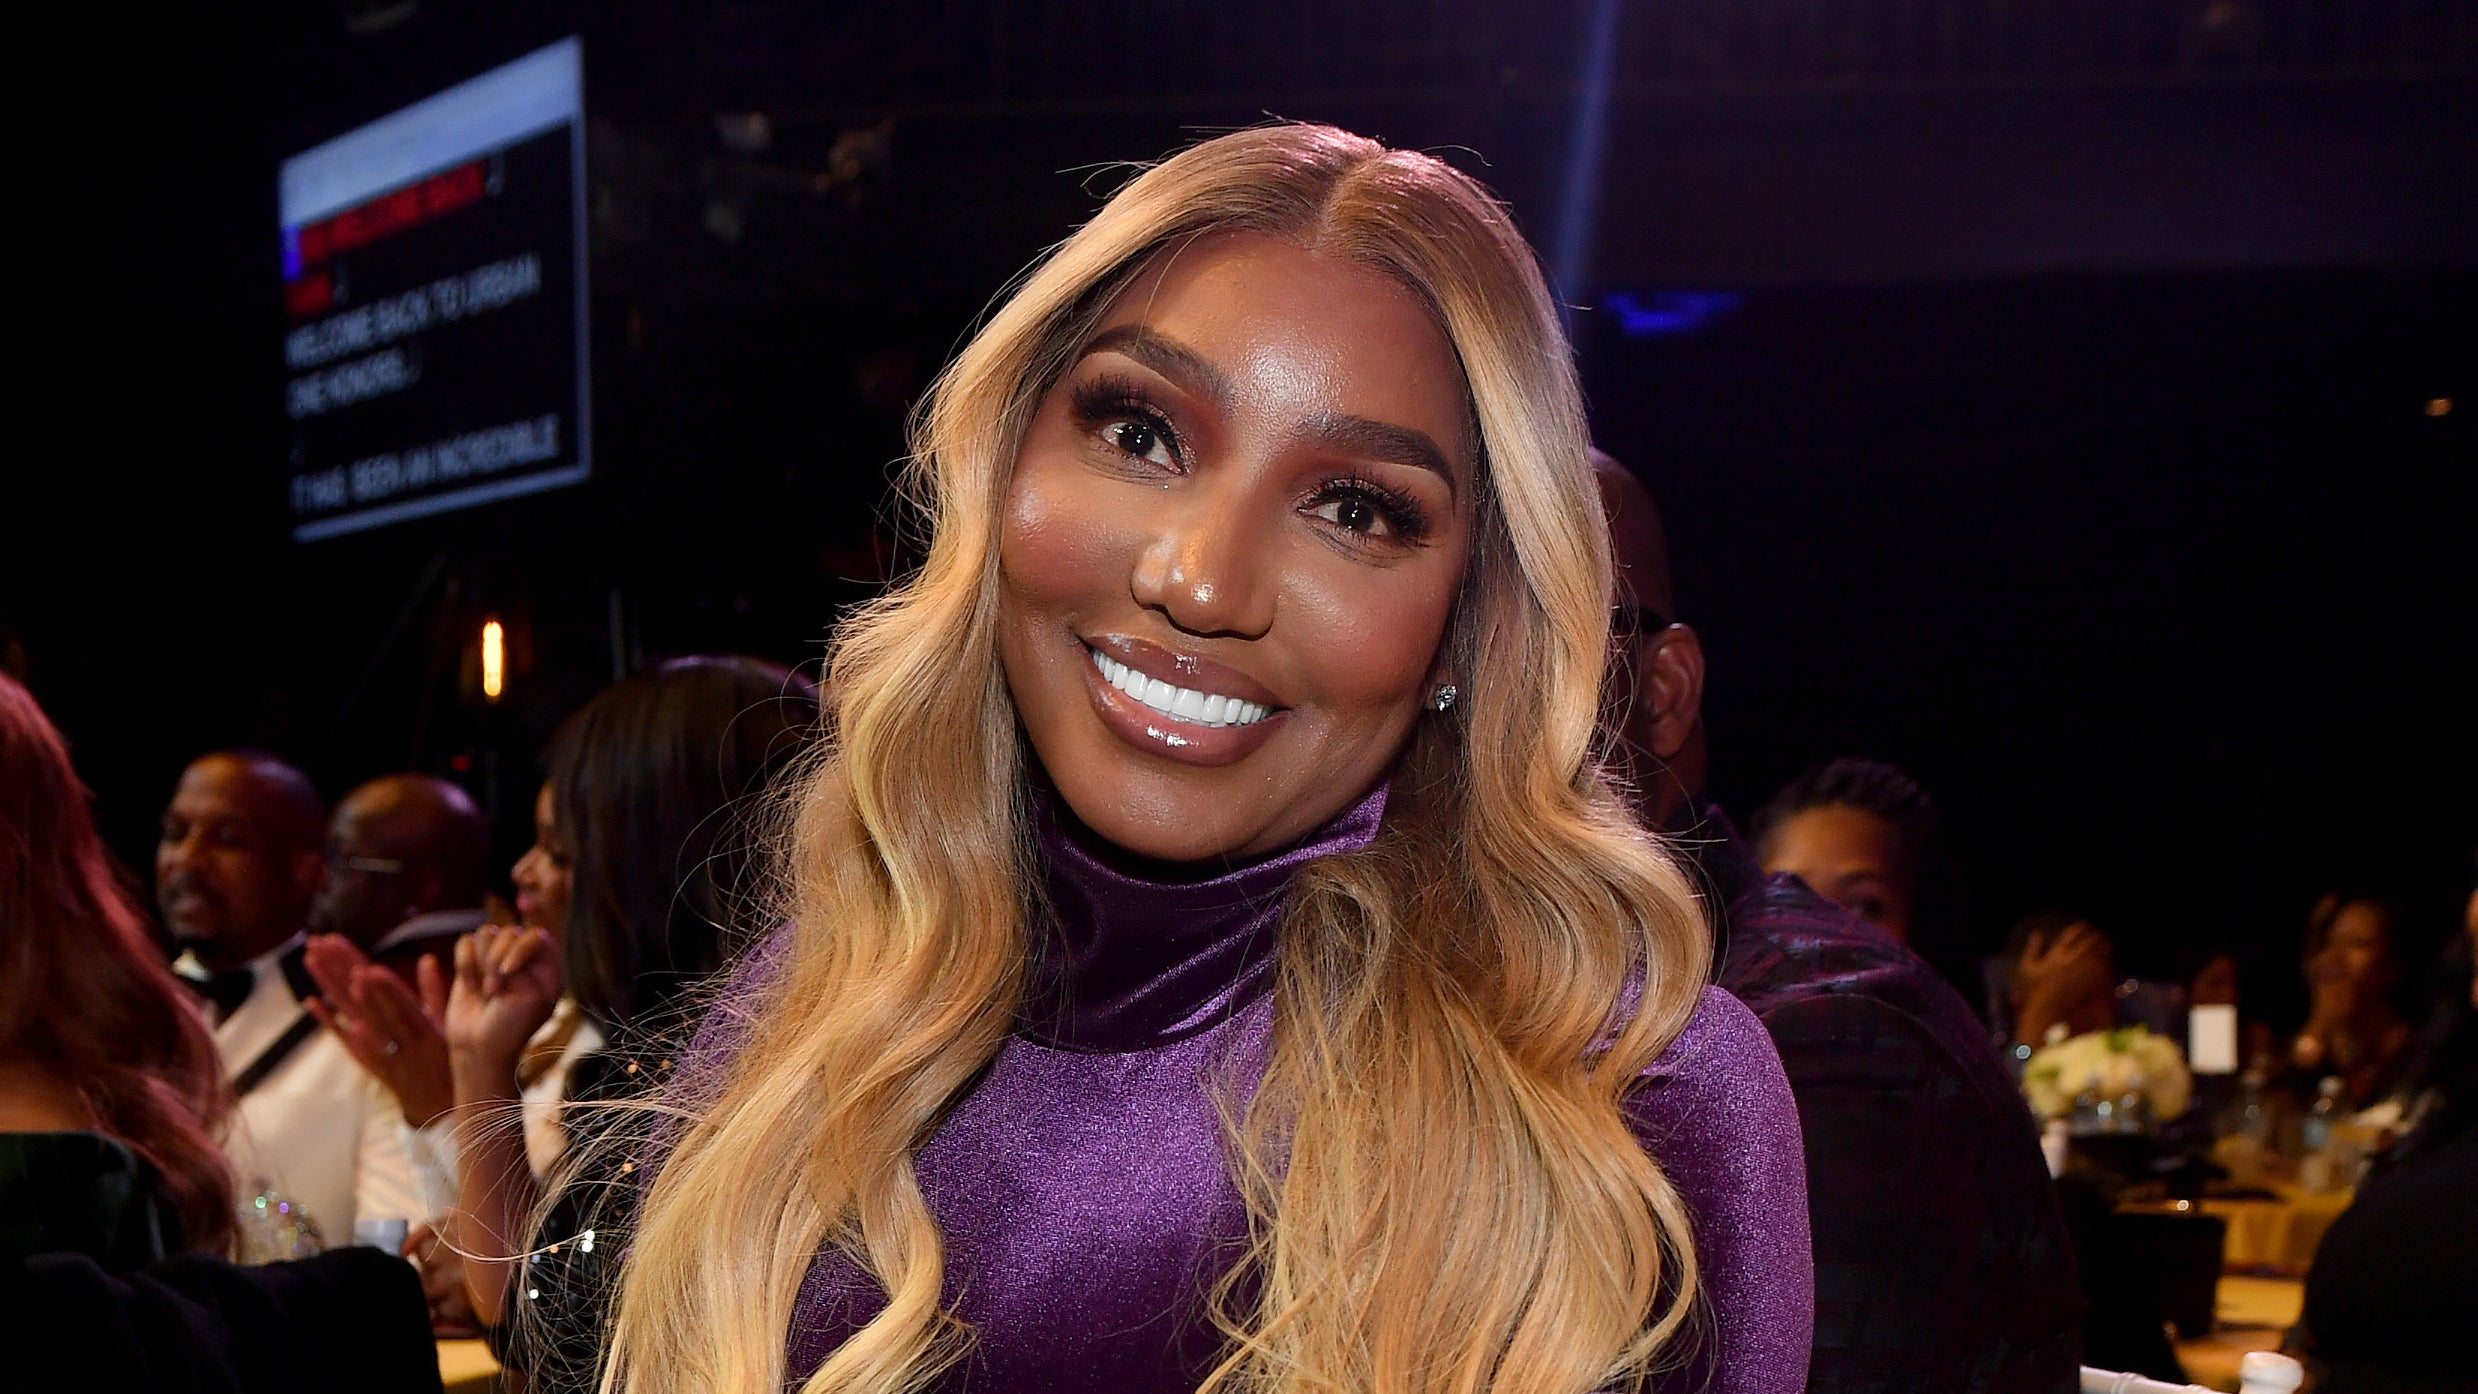 7 Takeaways from Nene Leakes' Interview With Carlos King